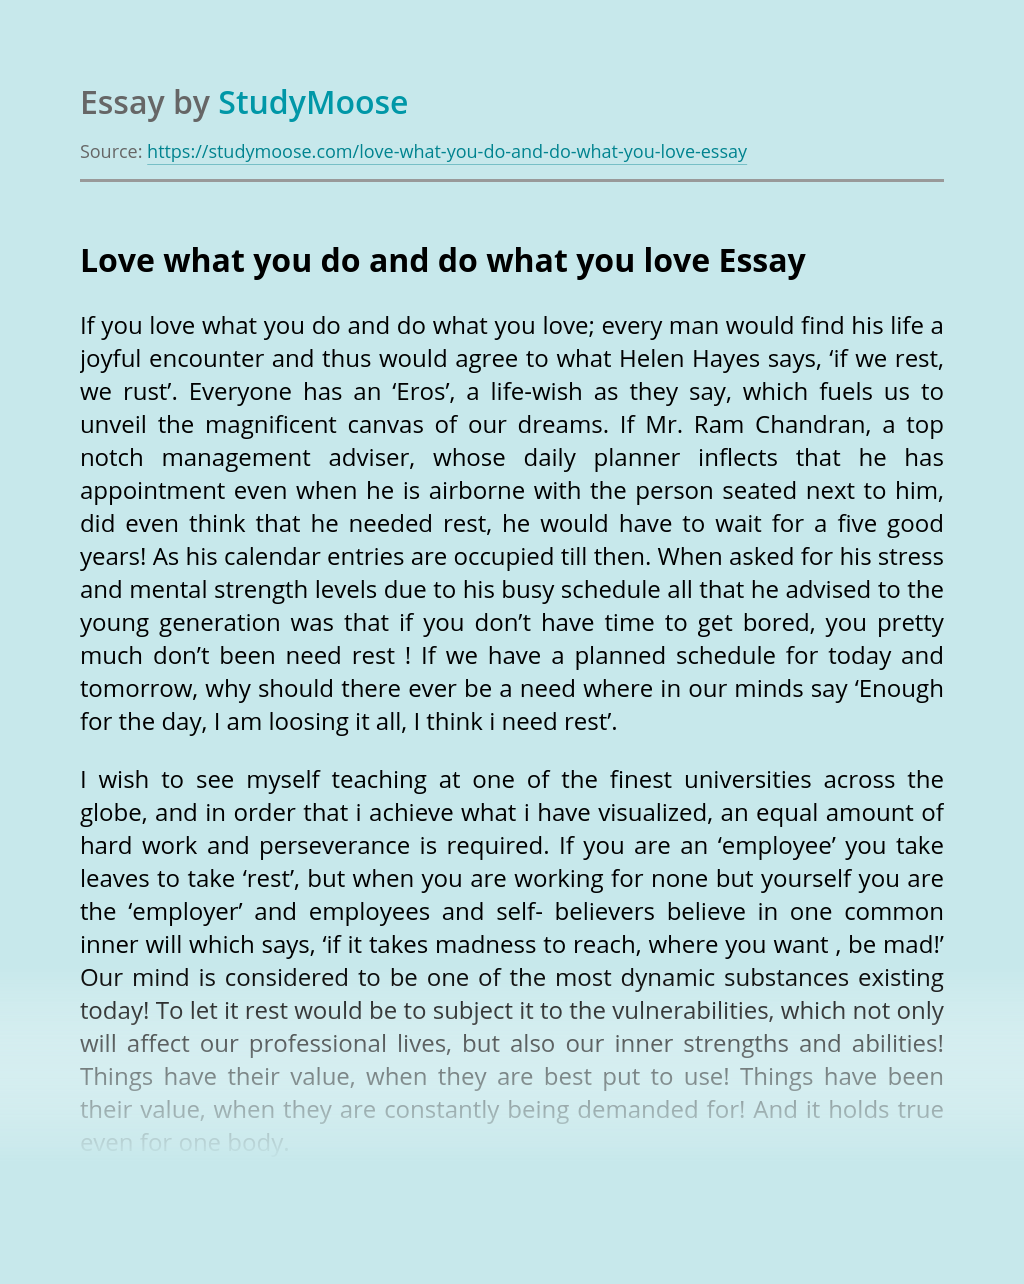 essay examples: essay about love